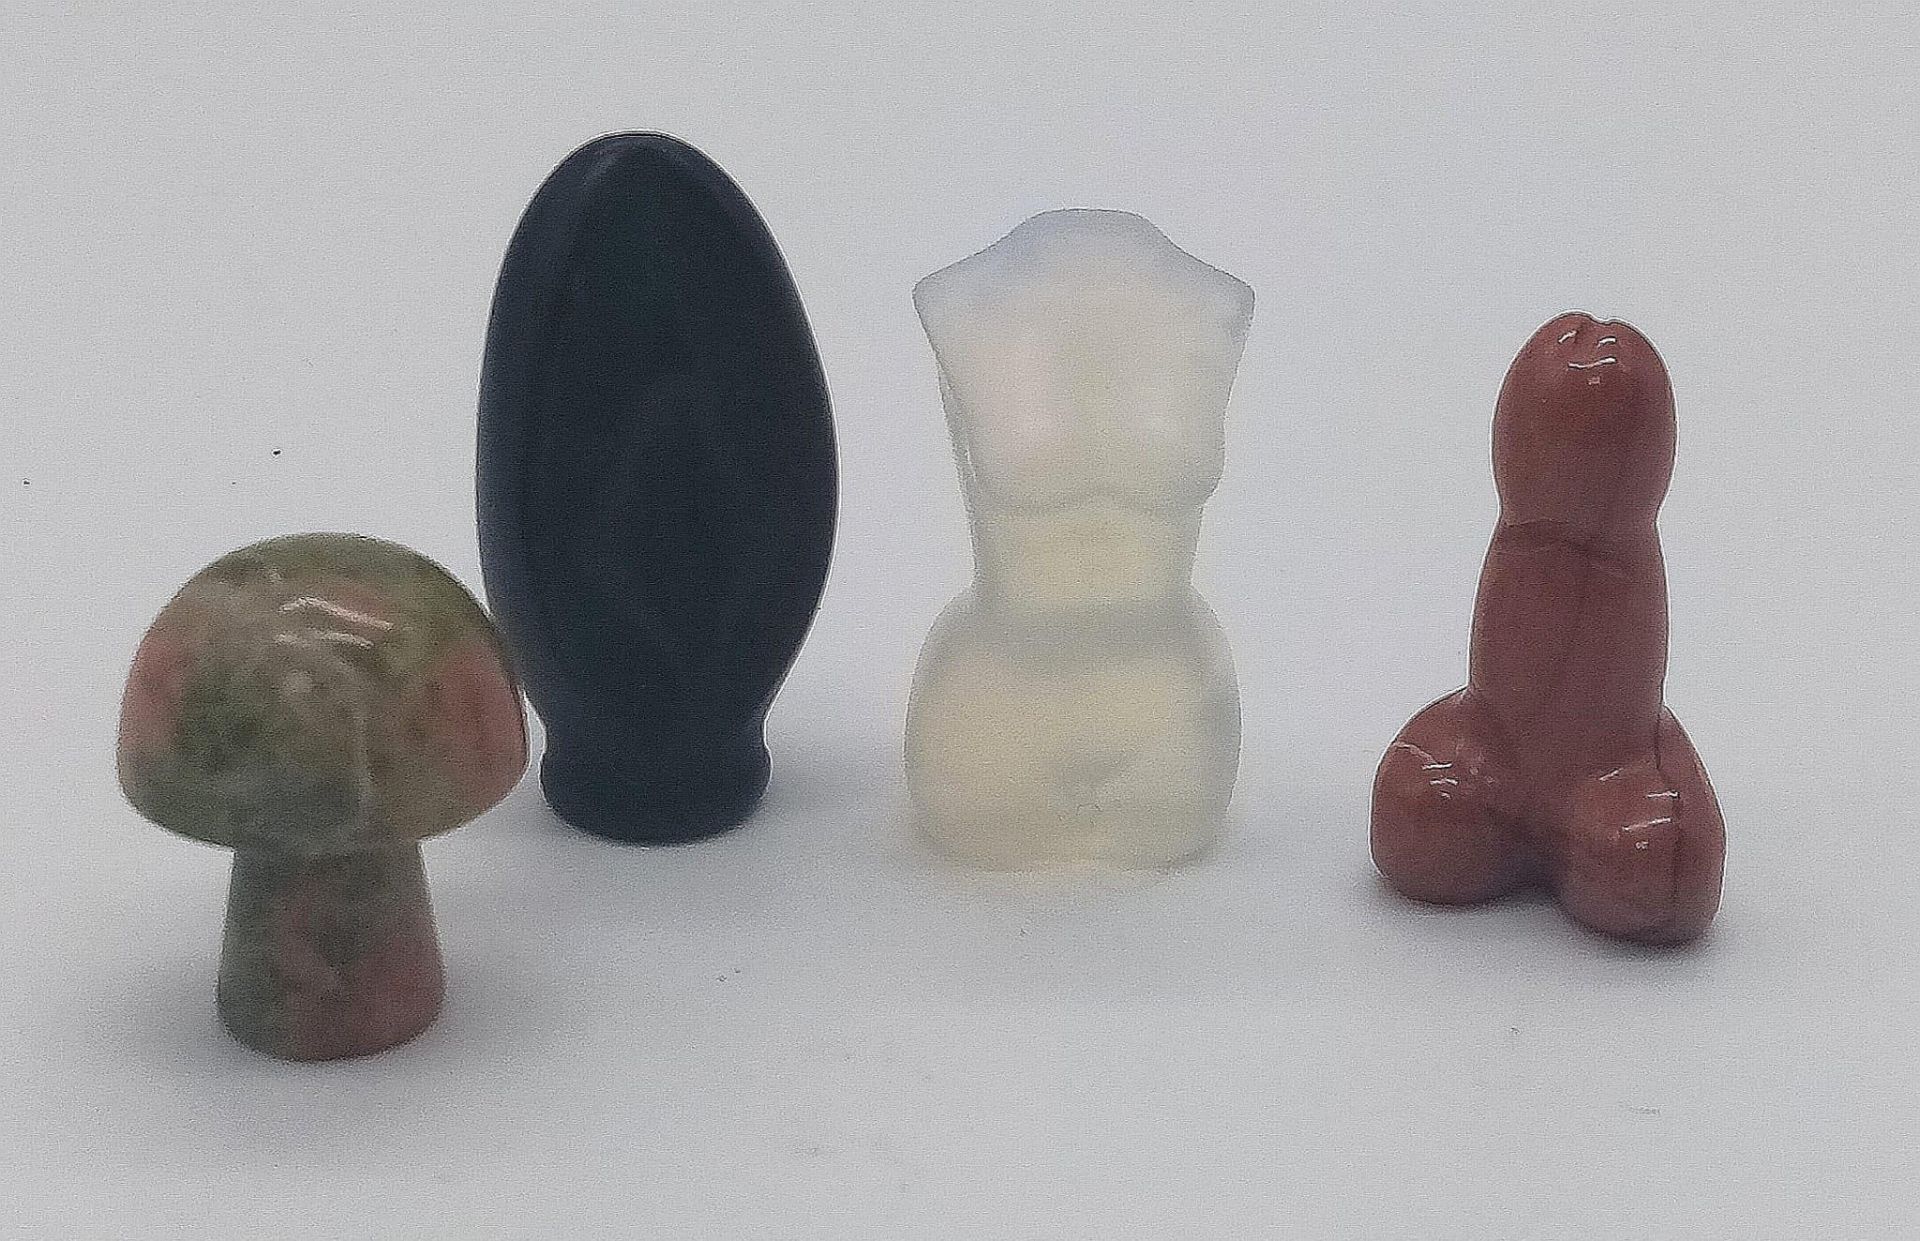 Collection of three sexual gemstone figurines...and a mushroom. Measuring between 2cm-4cm in length. - Image 3 of 3